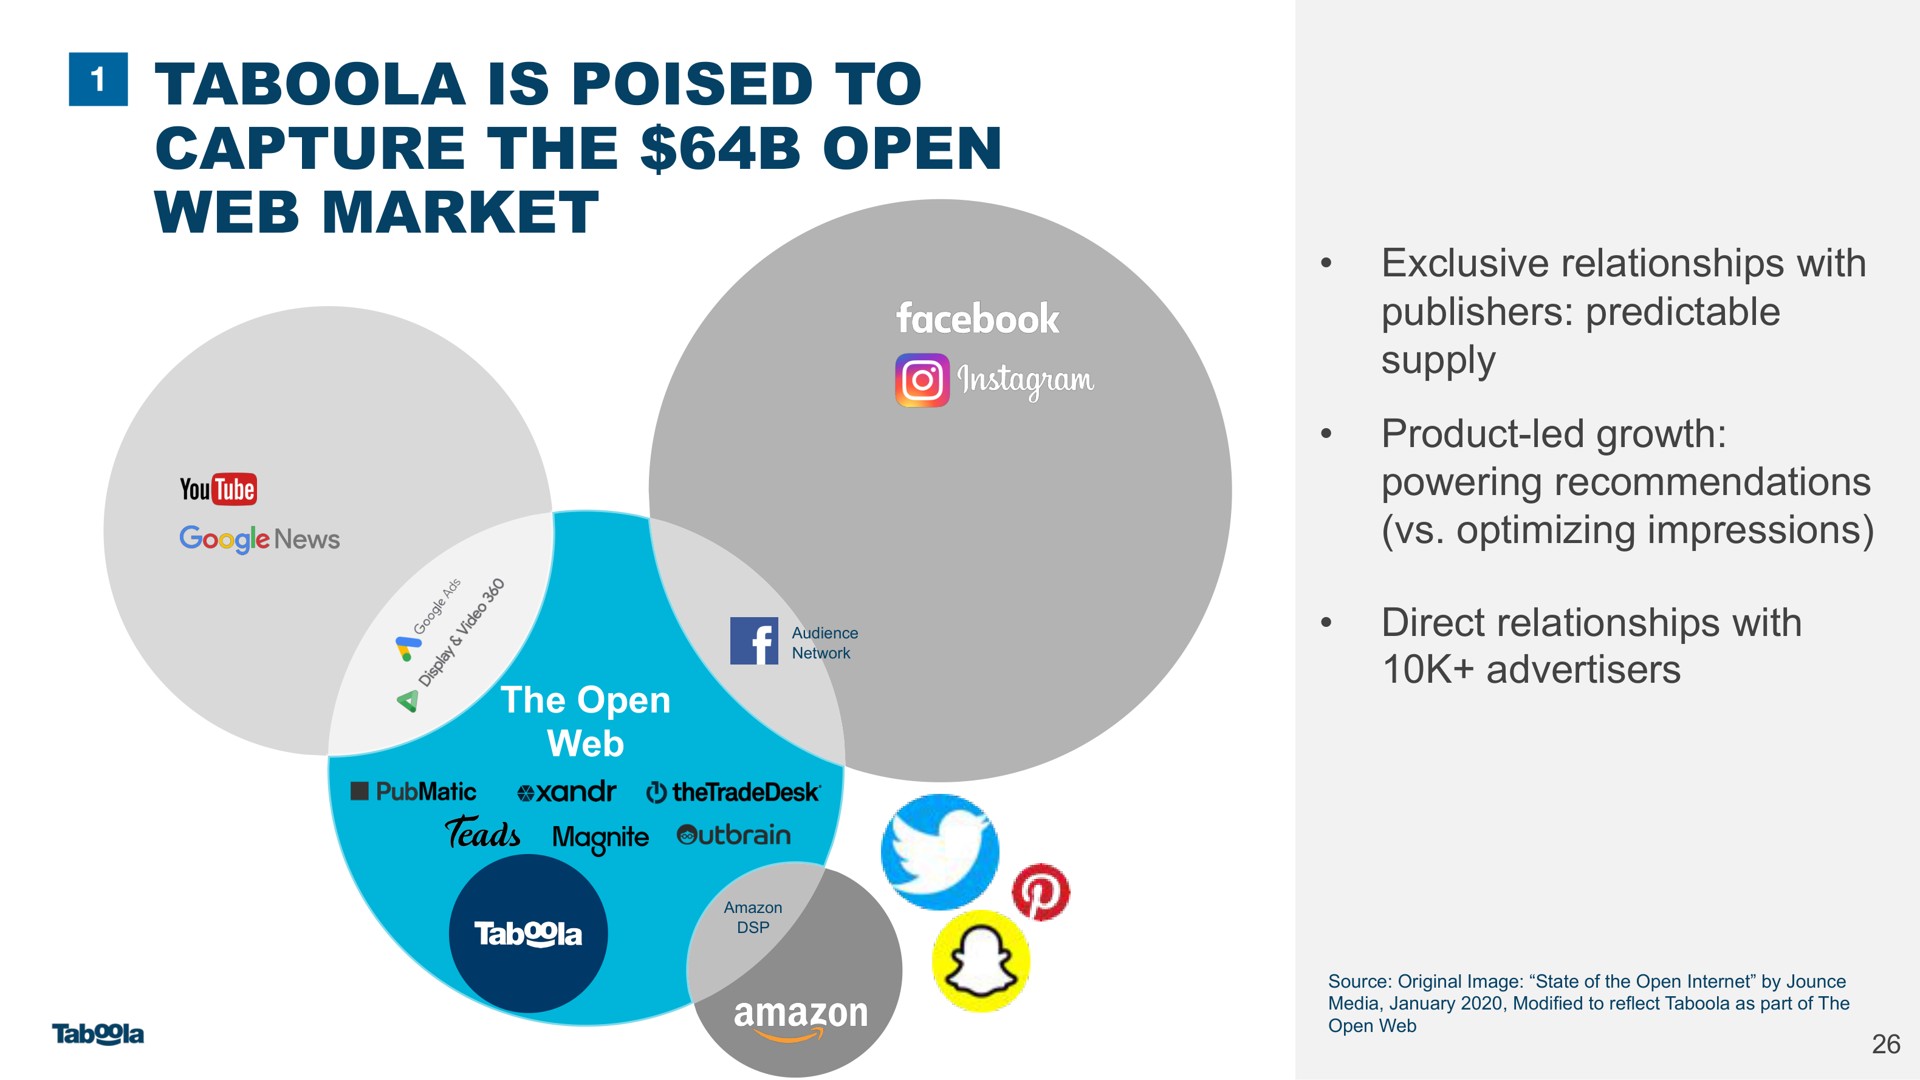 is poised to capture the open web market | Taboola